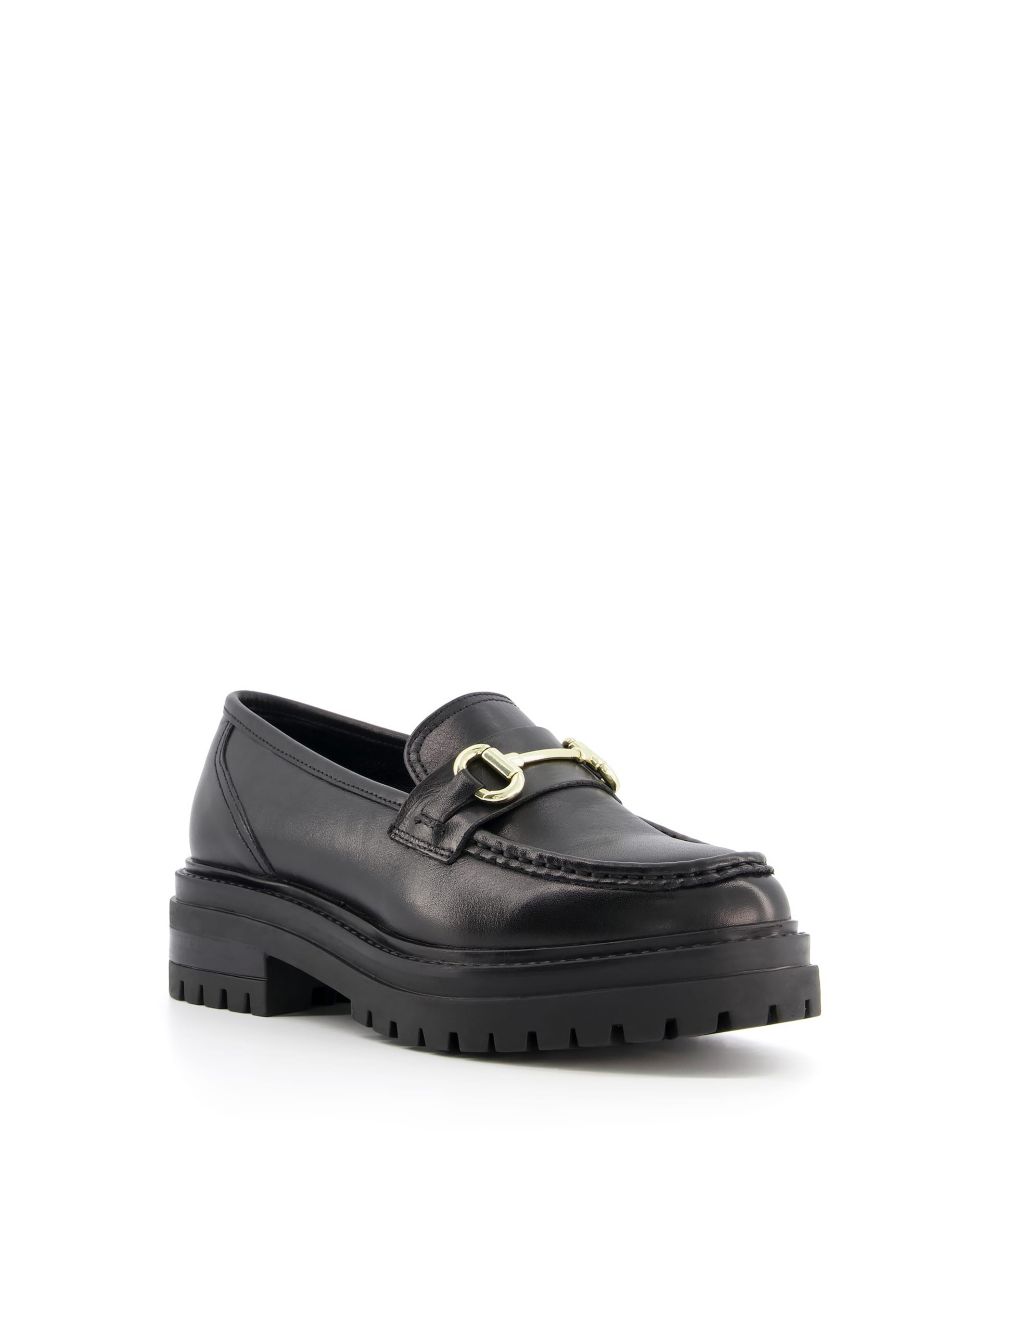 Leather Chunky Bar Flat Loafers image 3